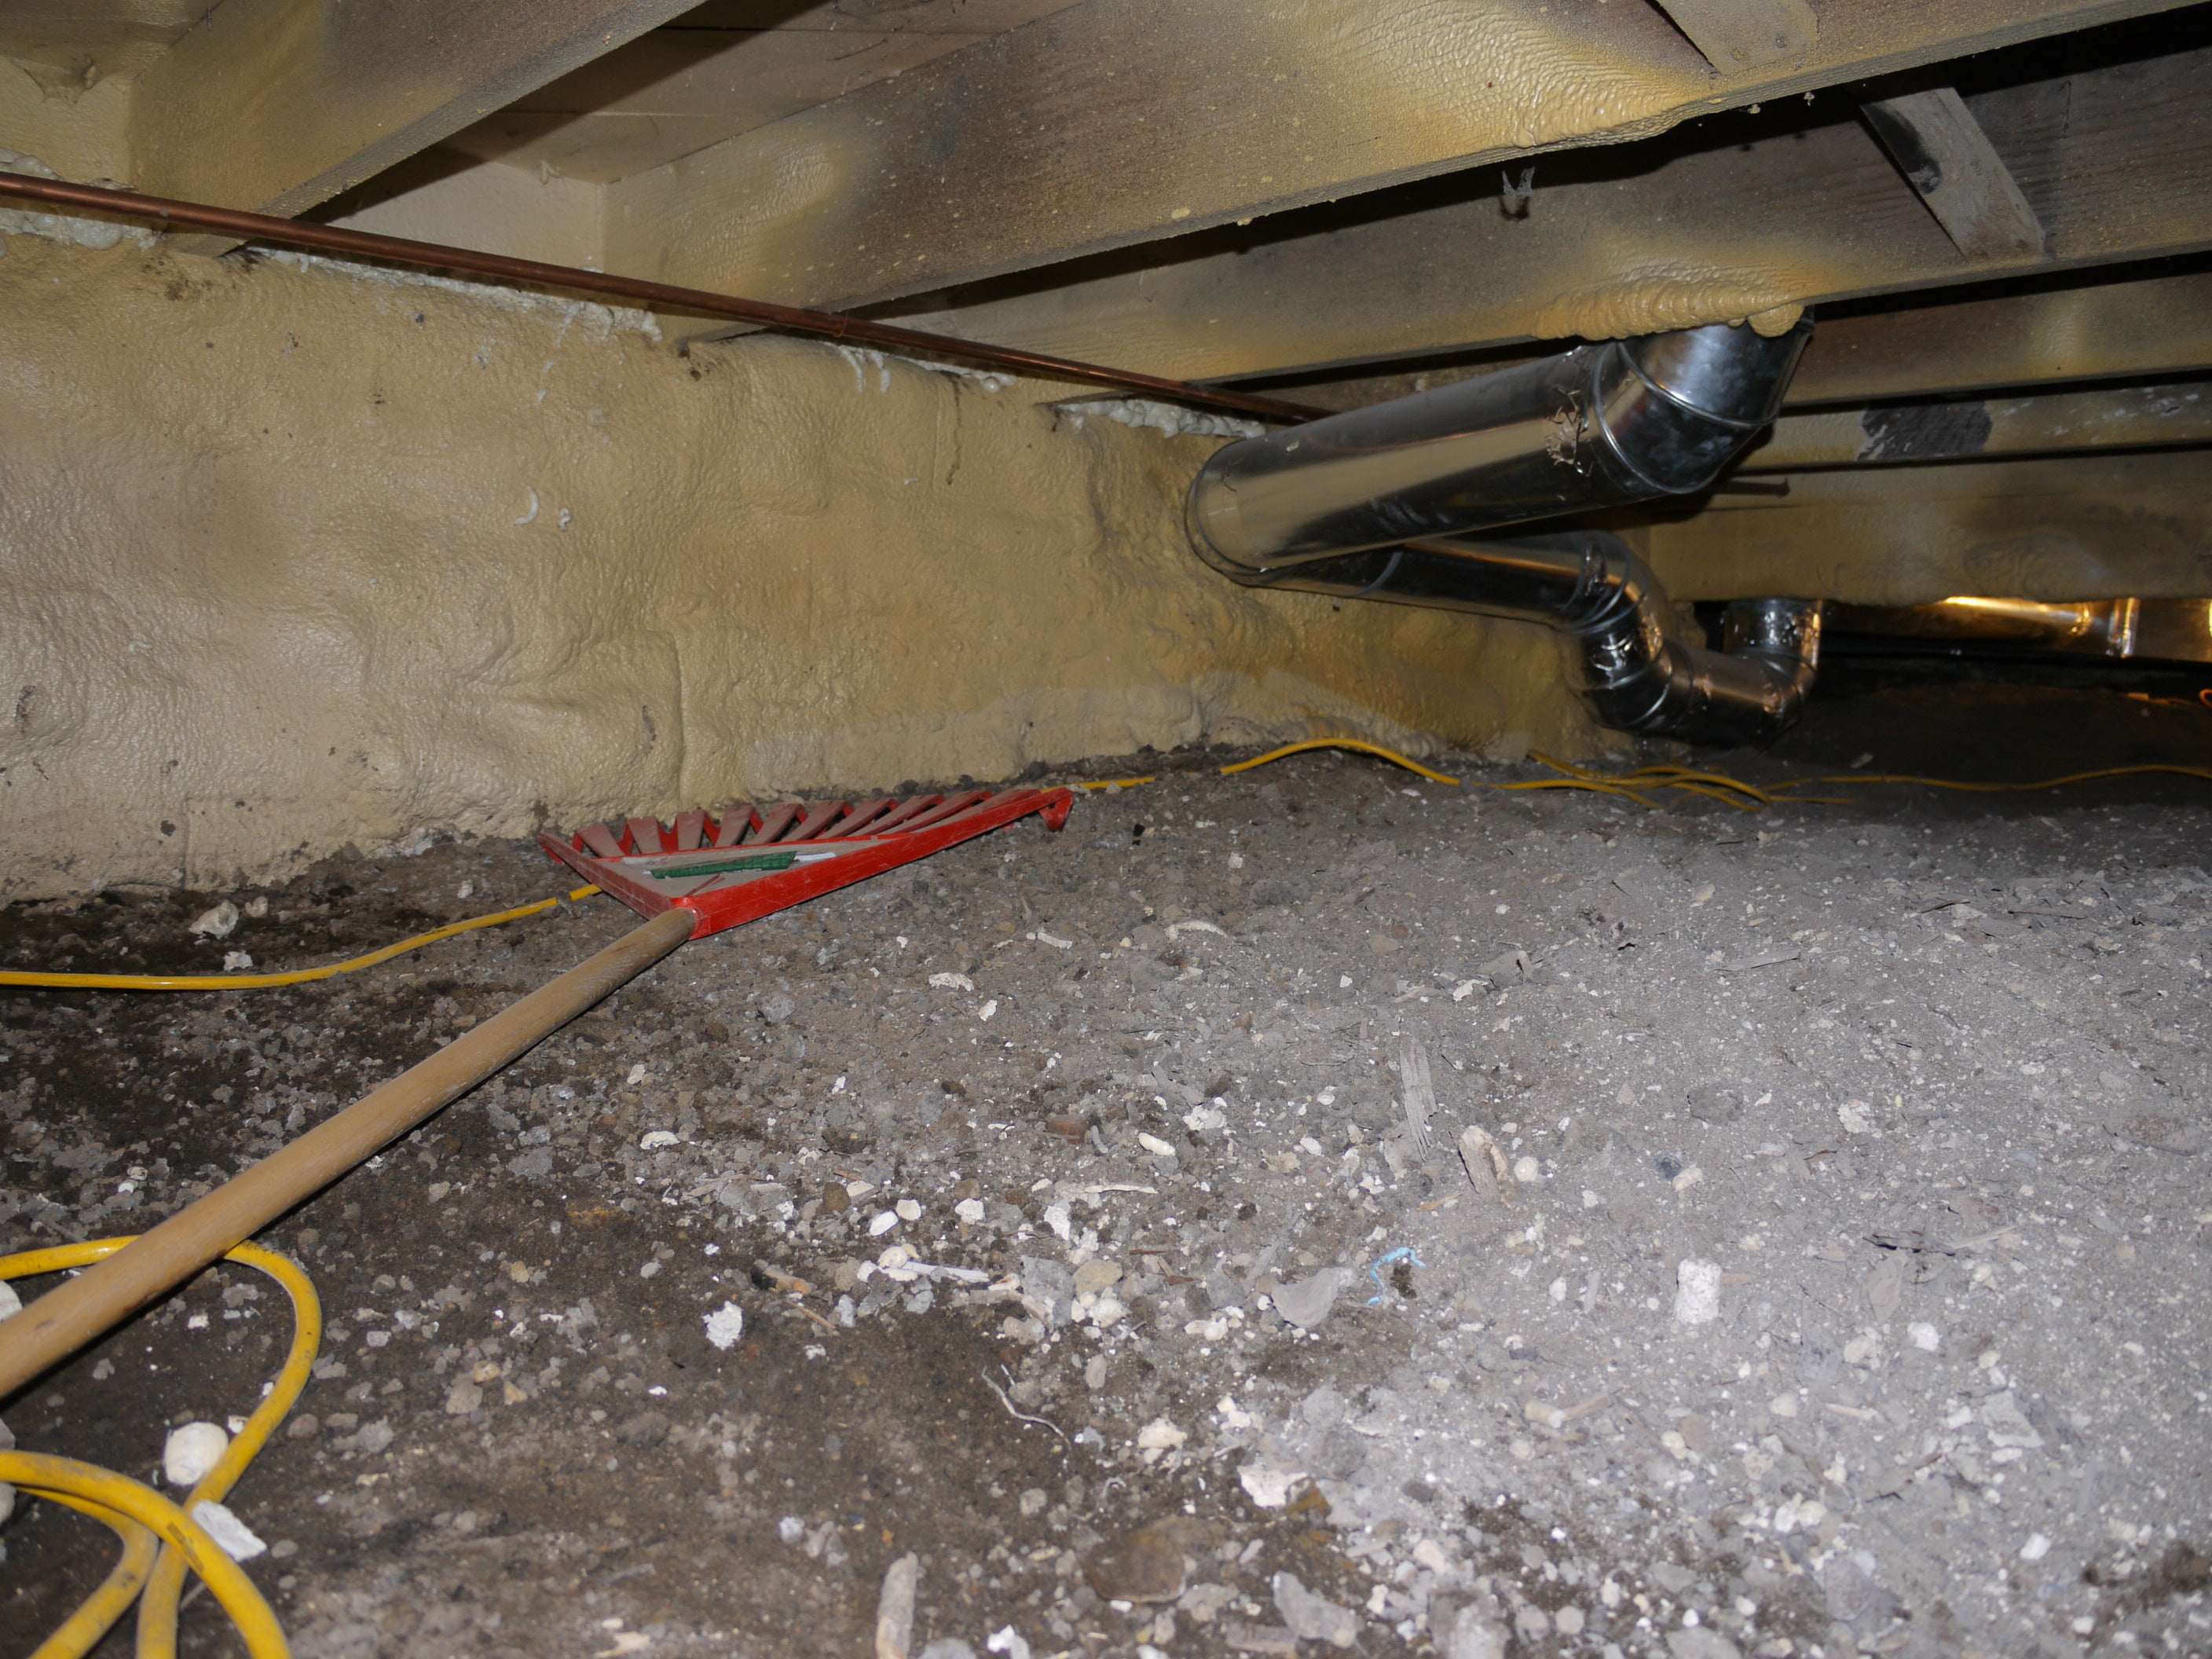 Crawl space cleaning and leveling with garden rake.